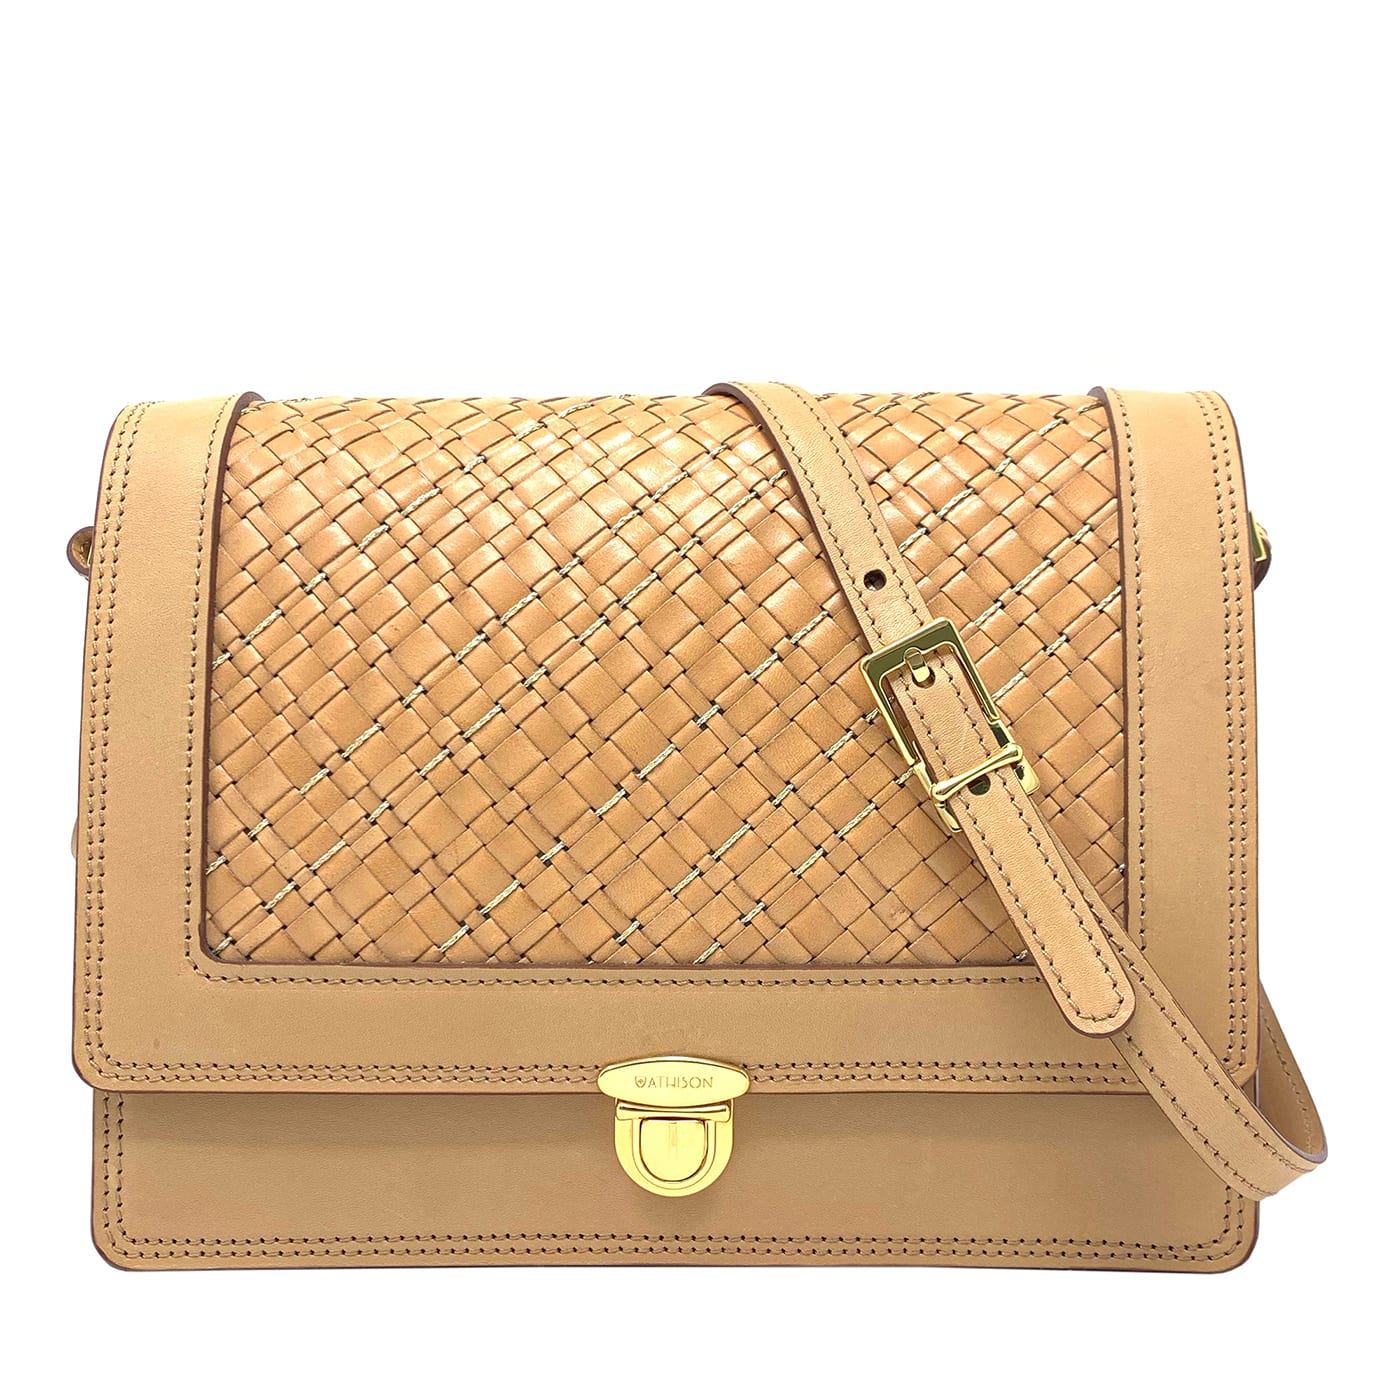 Quadro Braided Leather and Copper Beige Crossbody Bag - Athison